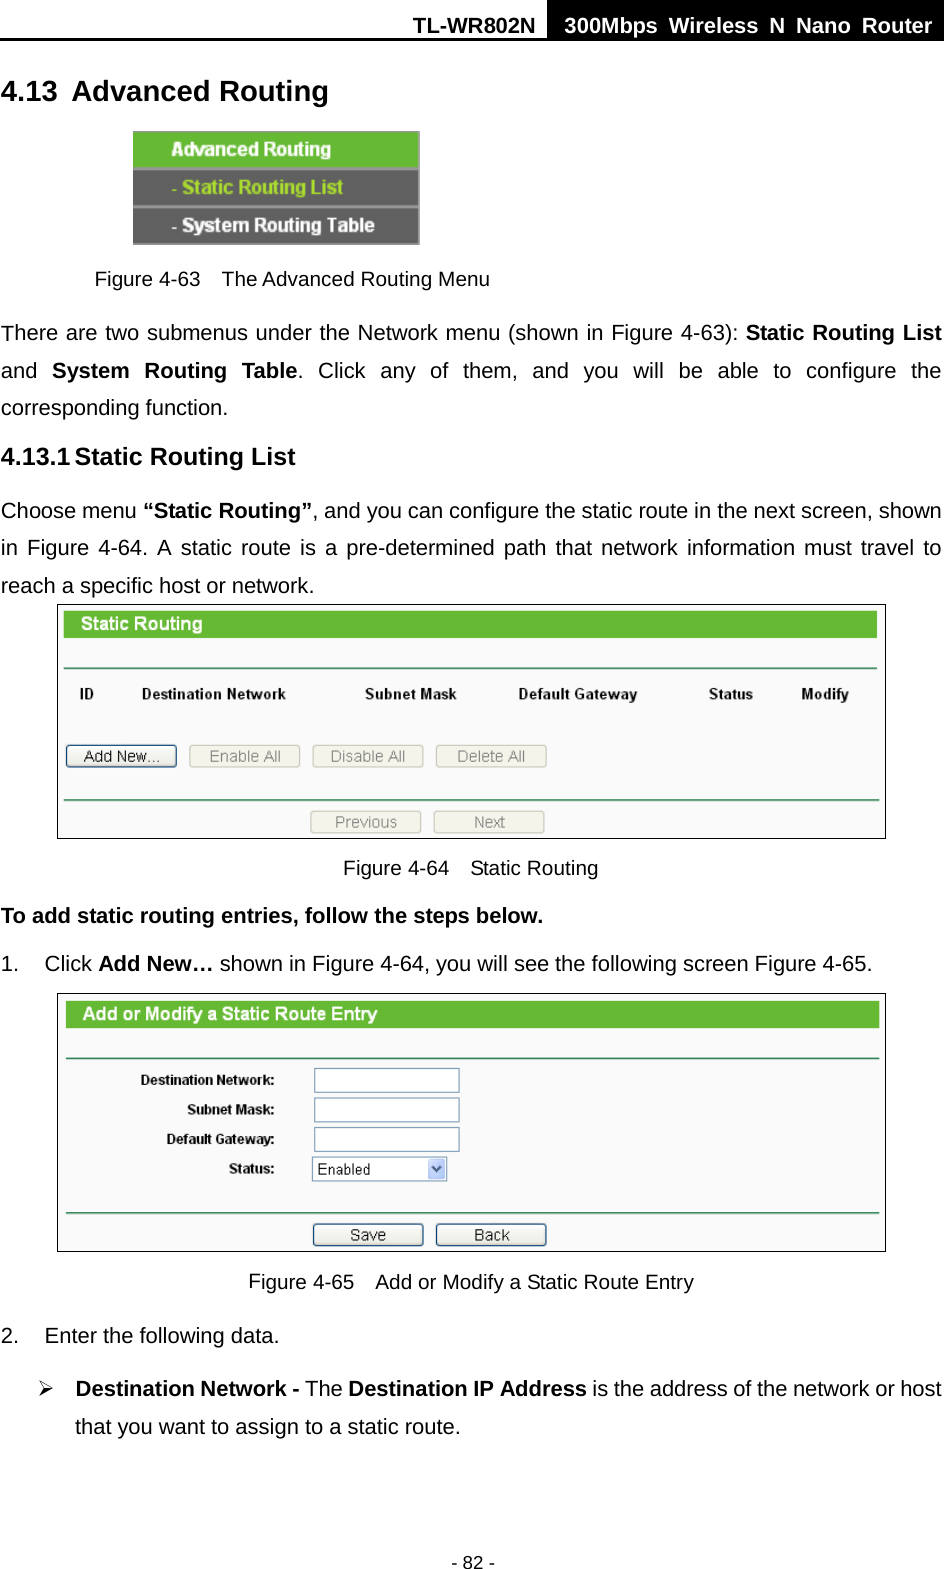 TL-WR802N  300Mbps Wireless N Nano Router  4.13 Advanced Routing  Figure 4-63  The Advanced Routing Menu There are two submenus under the Network menu (shown in Figure 4-63): Static Routing List and  System Routing Table.  Click any of them, and you will be able to configure the corresponding function. 4.13.1 Static Routing List Choose menu “Static Routing”, and you can configure the static route in the next screen, shown in Figure 4-64. A static route is a pre-determined path that network information must travel to reach a specific host or network.  Figure 4-64  Static Routing To add static routing entries, follow the steps below. 1. Click Add New… shown in Figure 4-64, you will see the following screen Figure 4-65.    Figure 4-65  Add or Modify a Static Route Entry 2. Enter the following data.  Destination Network - The Destination IP Address is the address of the network or host that you want to assign to a static route. - 82 - 